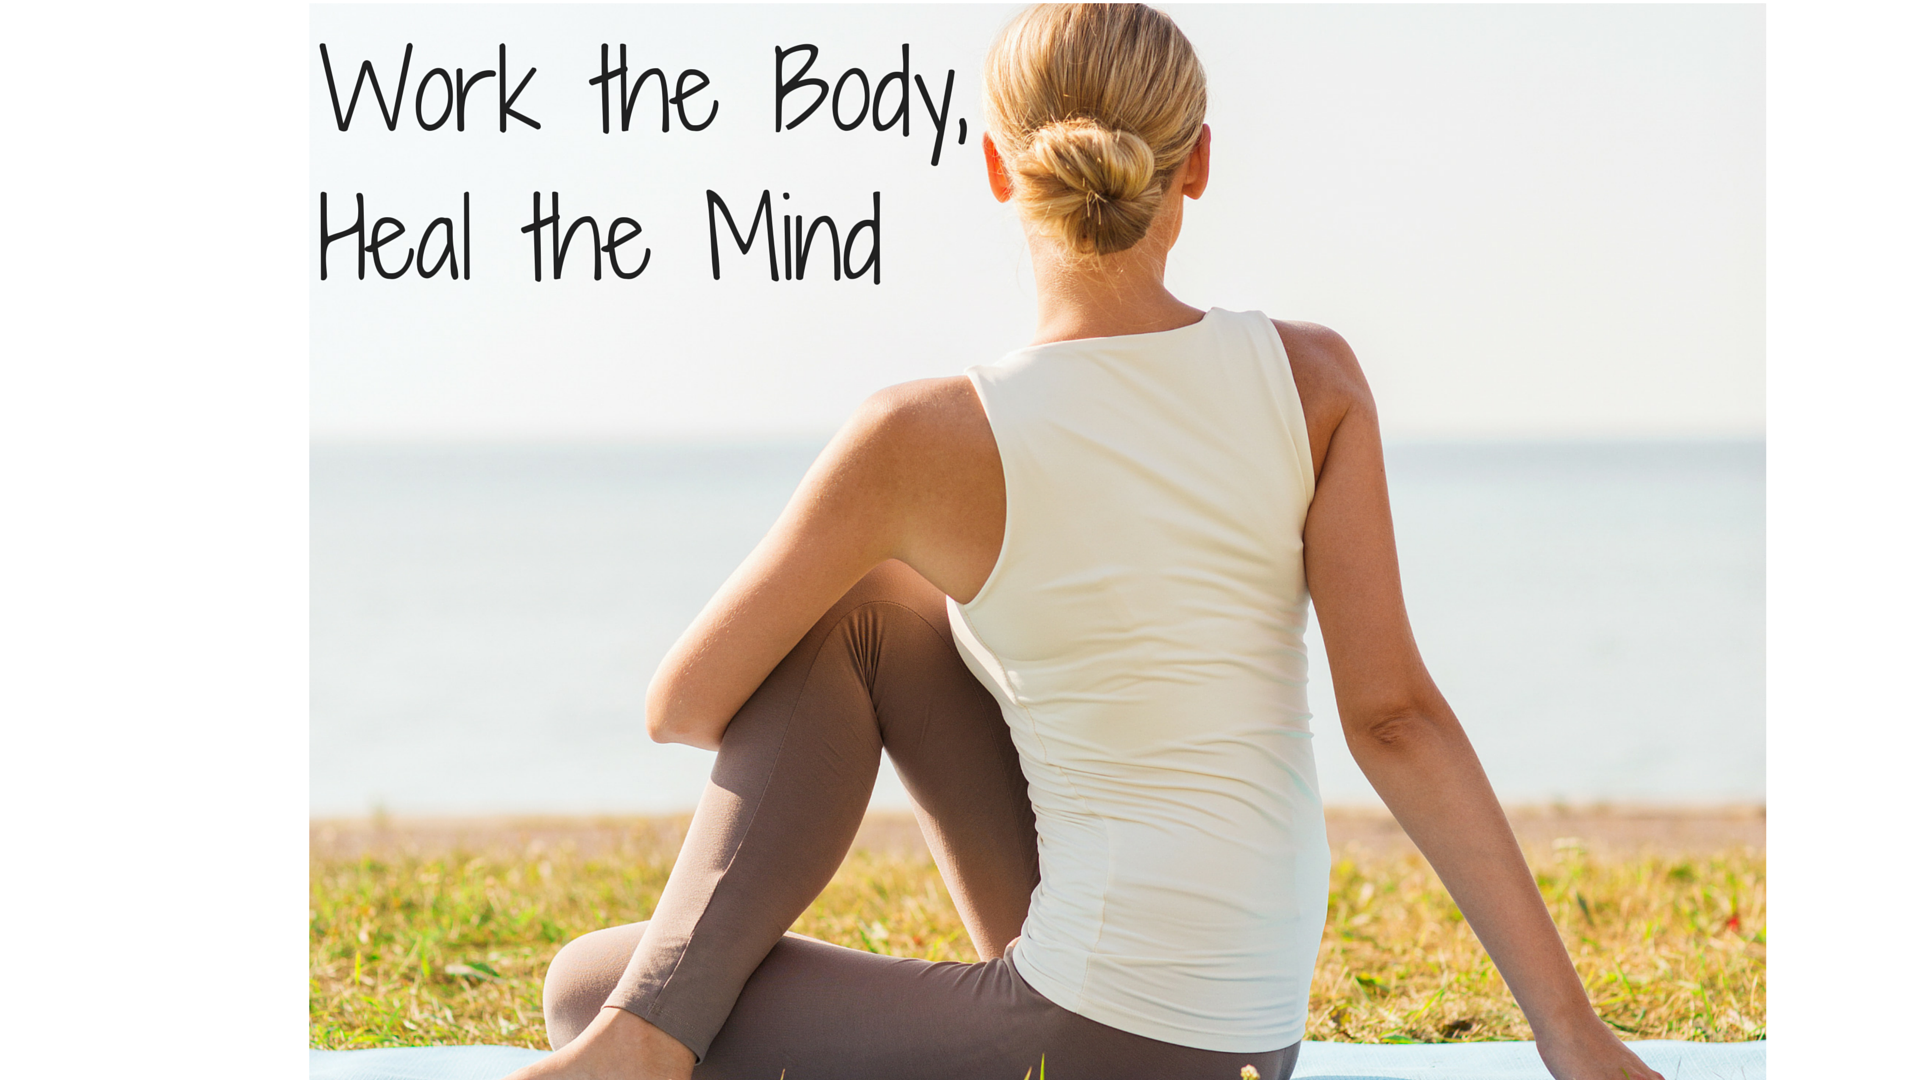 Work the Body, Heal the Mind